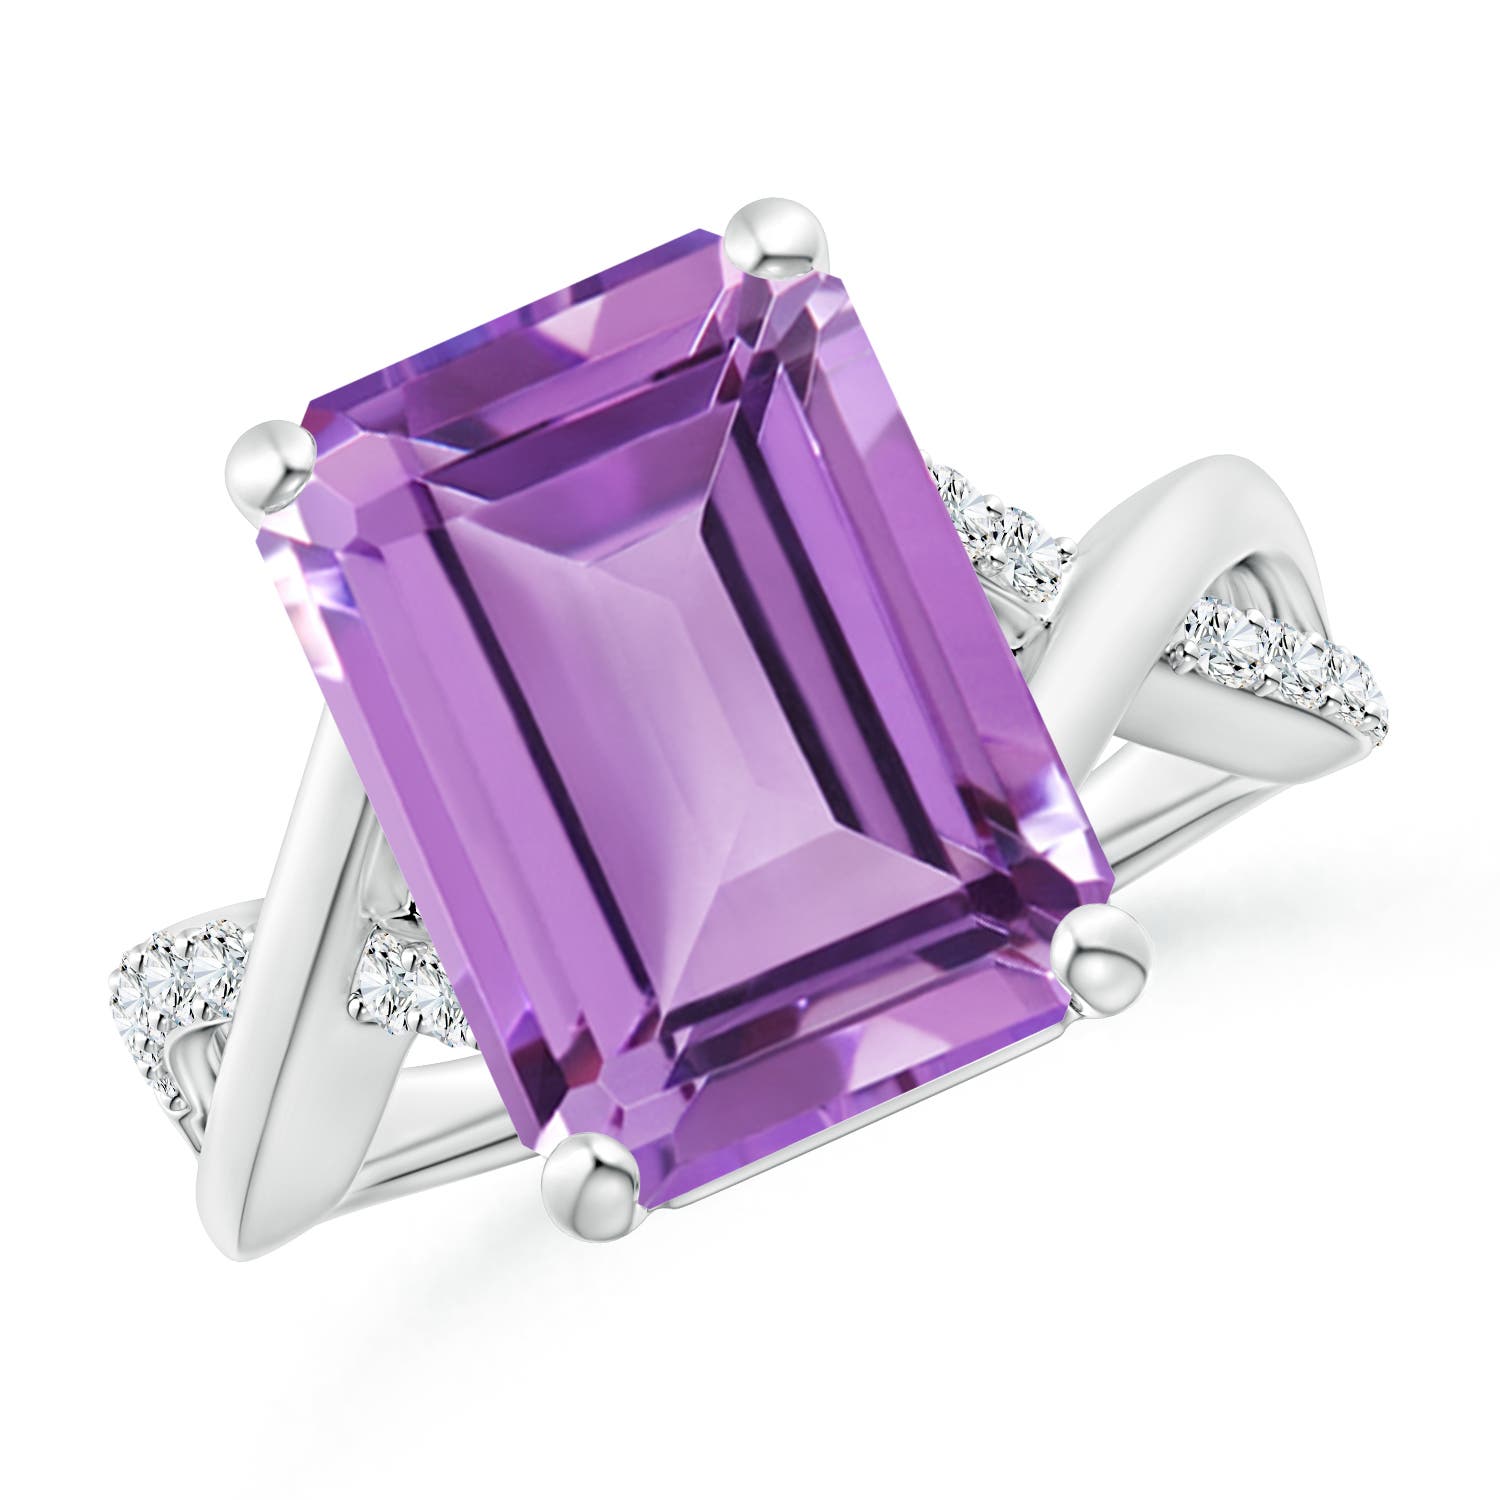 A - Amethyst / 6.7 CT / 14 KT White Gold